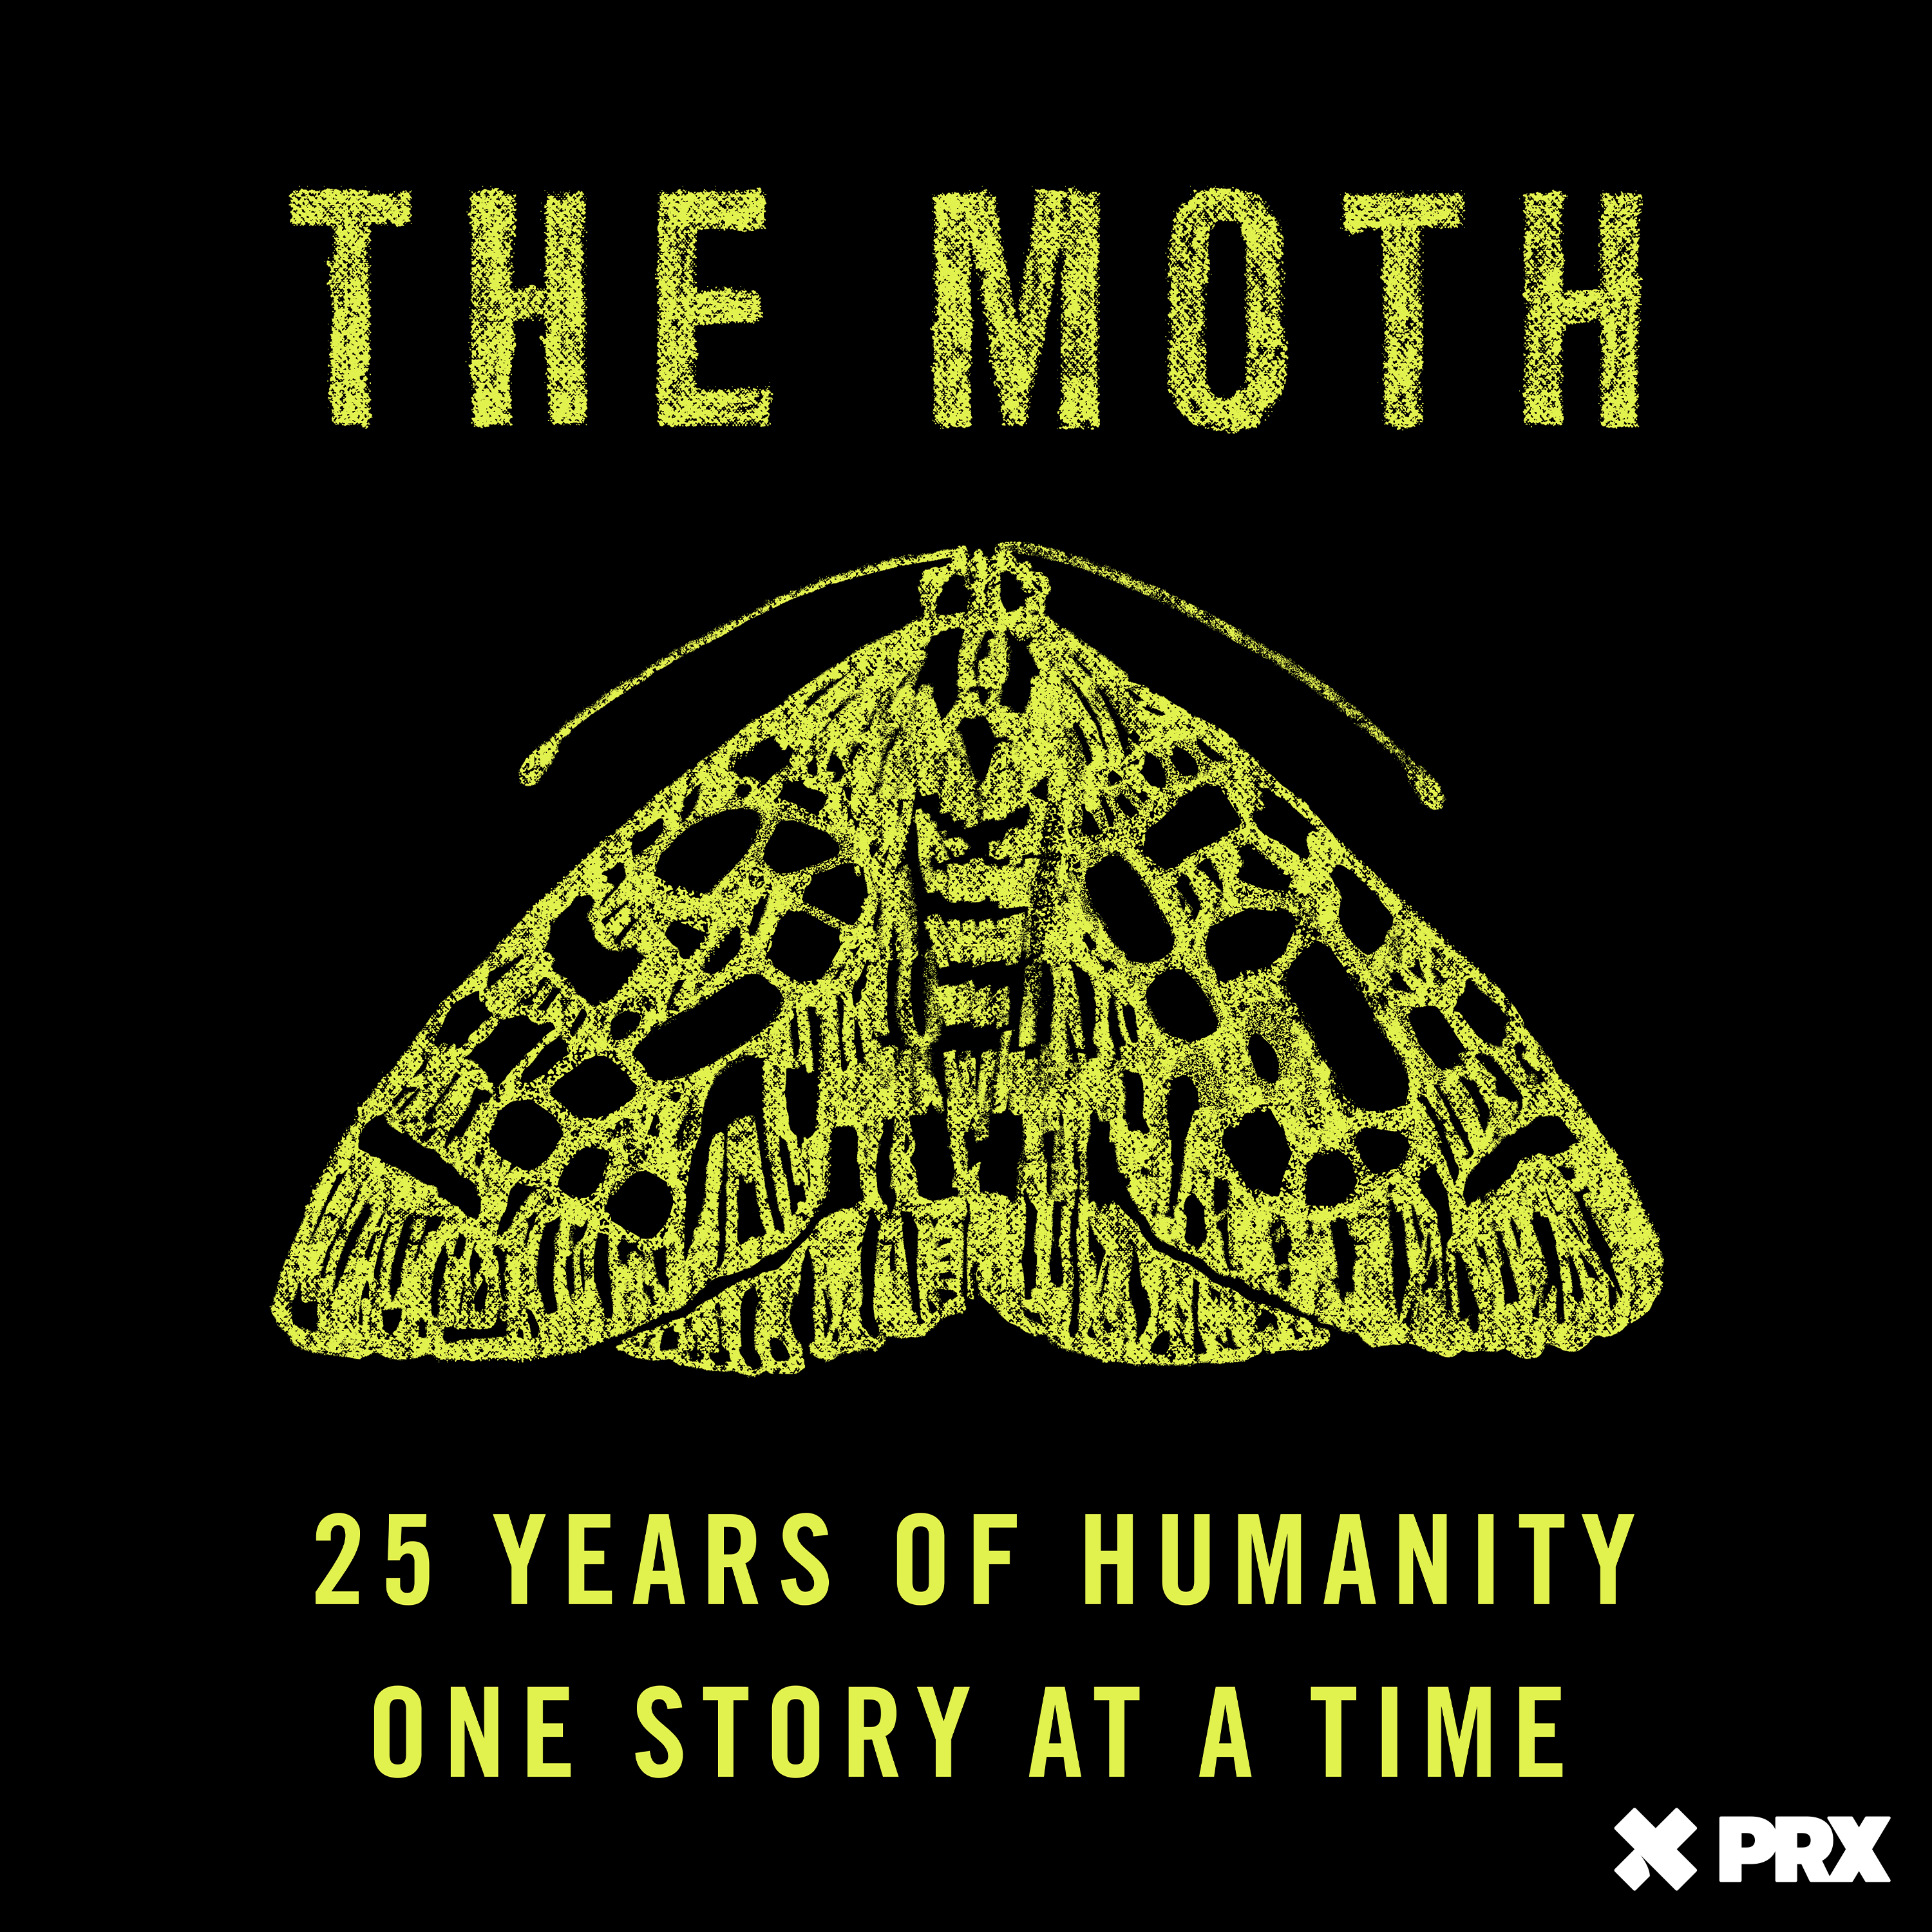 The Moth Radio Hour: In The Name of Love